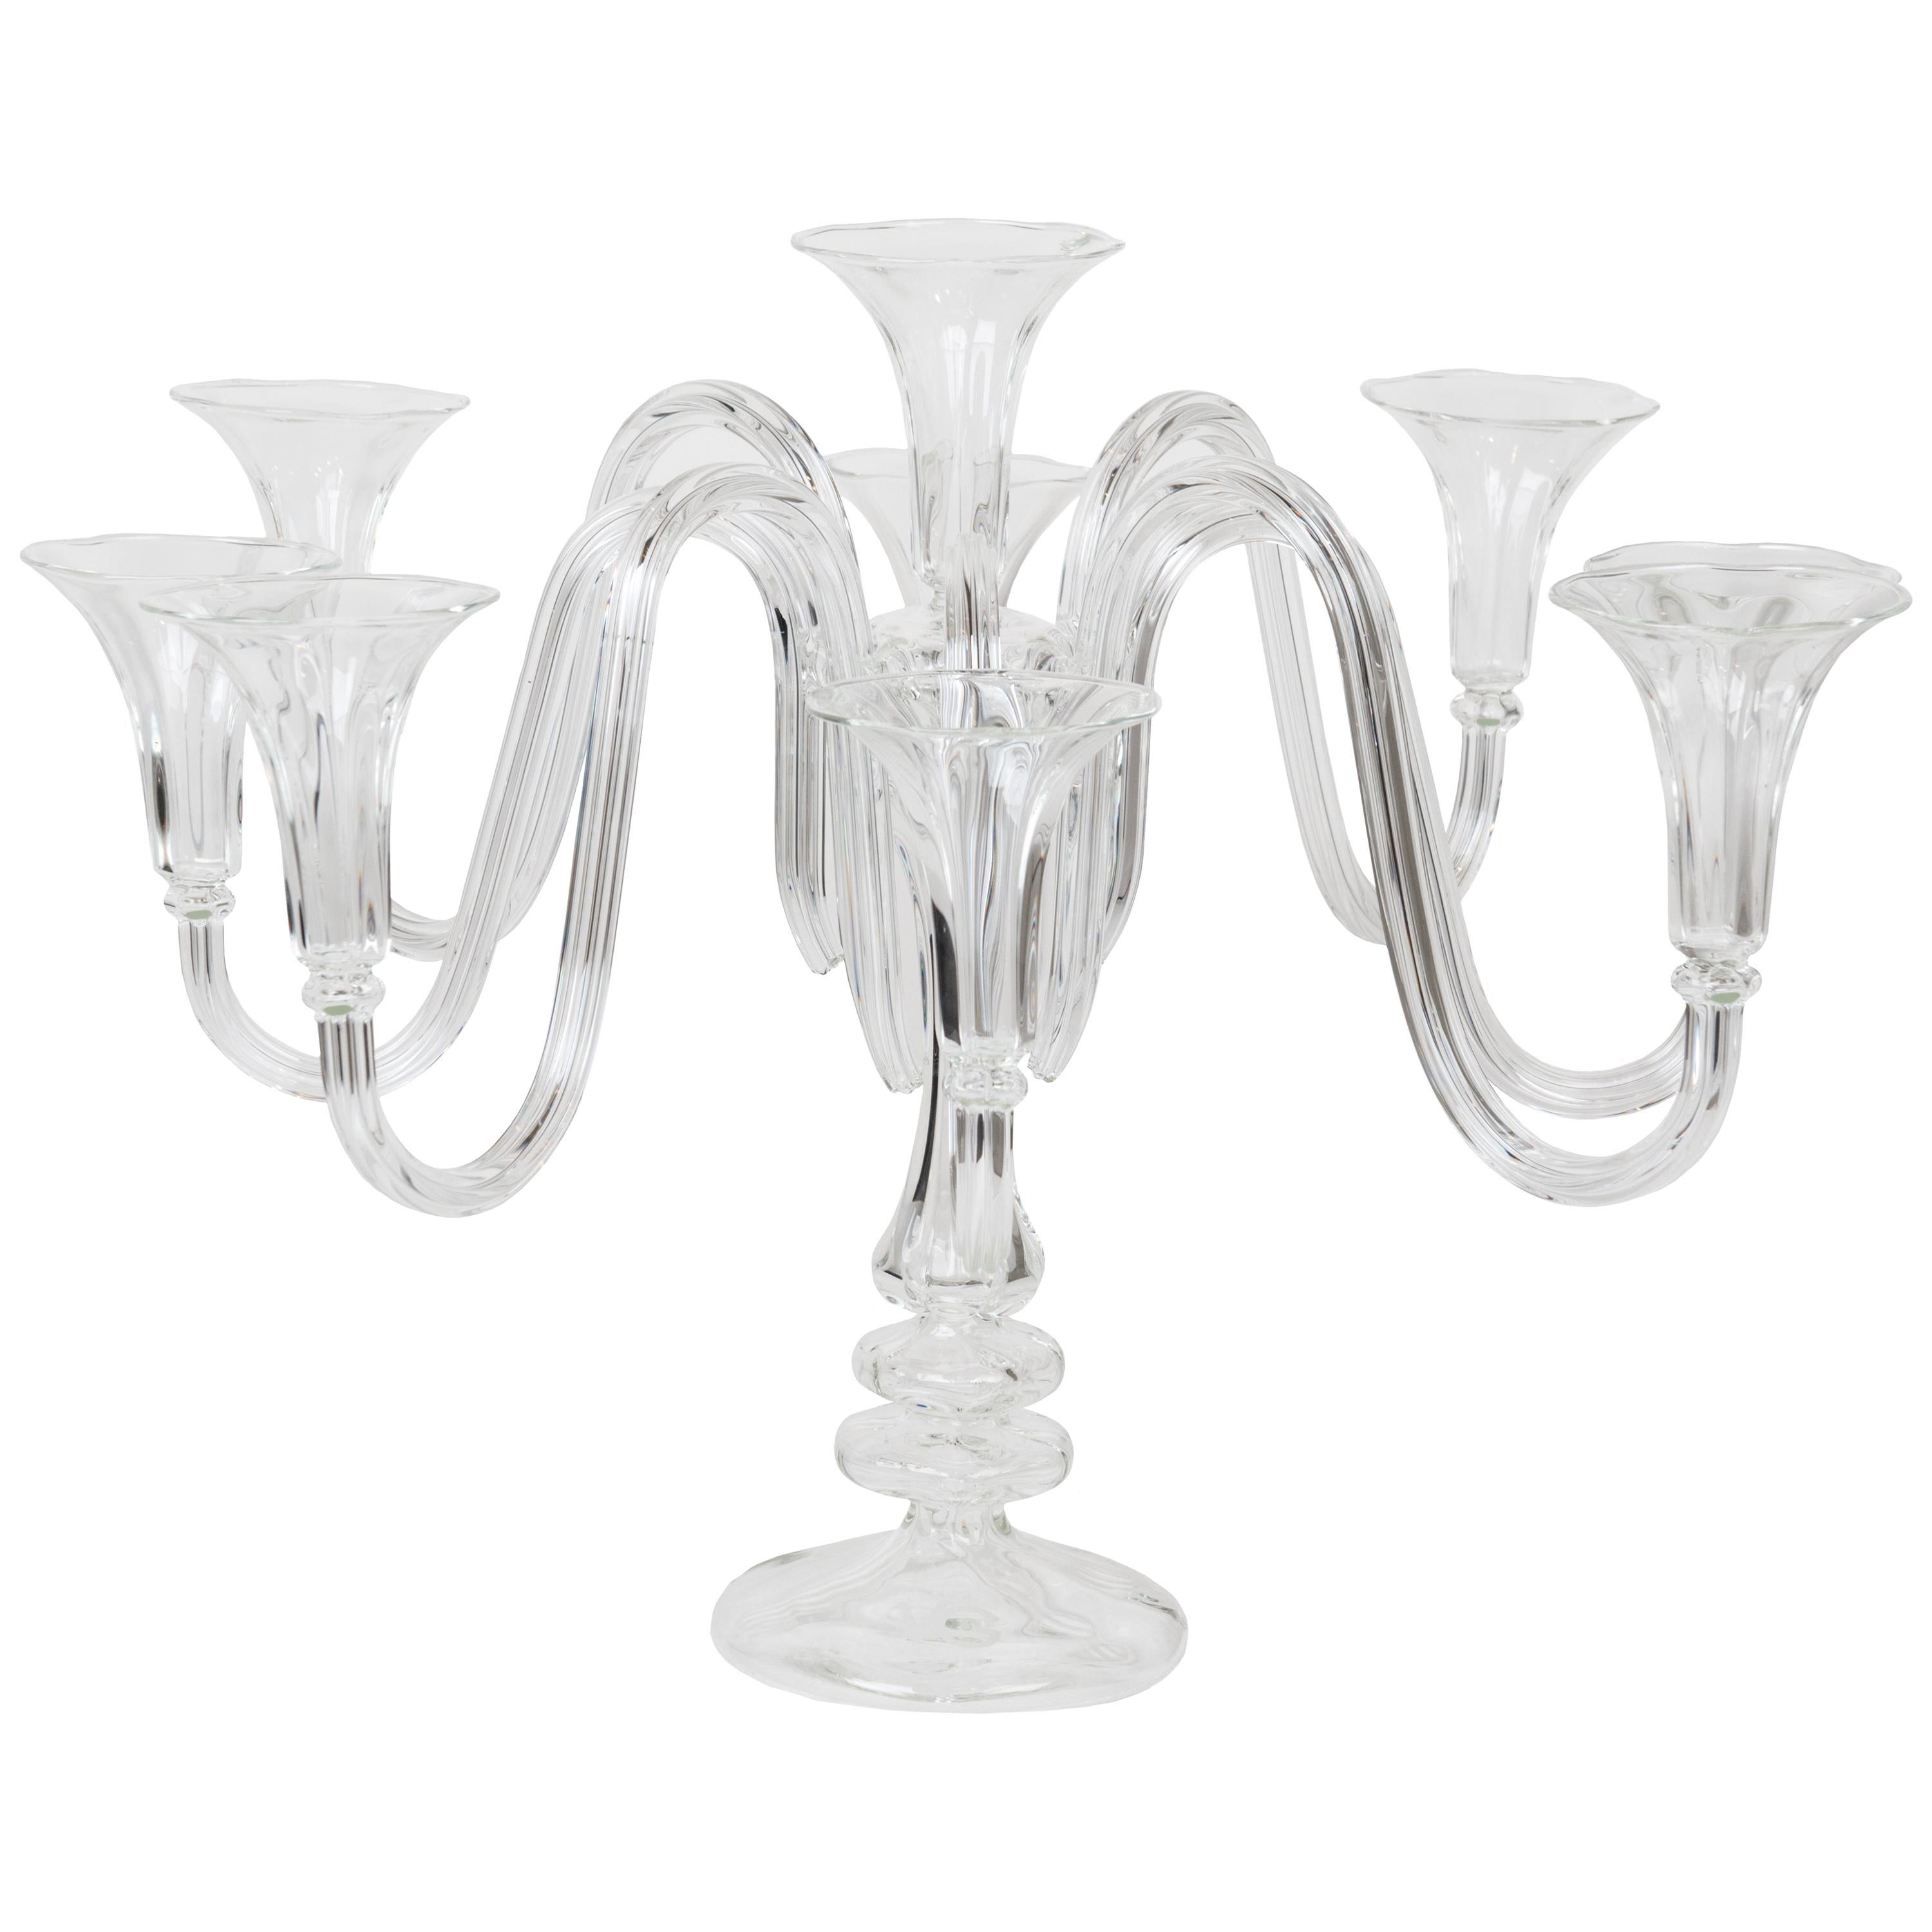 Candleholder Royal Pyrex with 9 Arms, in Pyrex, Italy For Sale